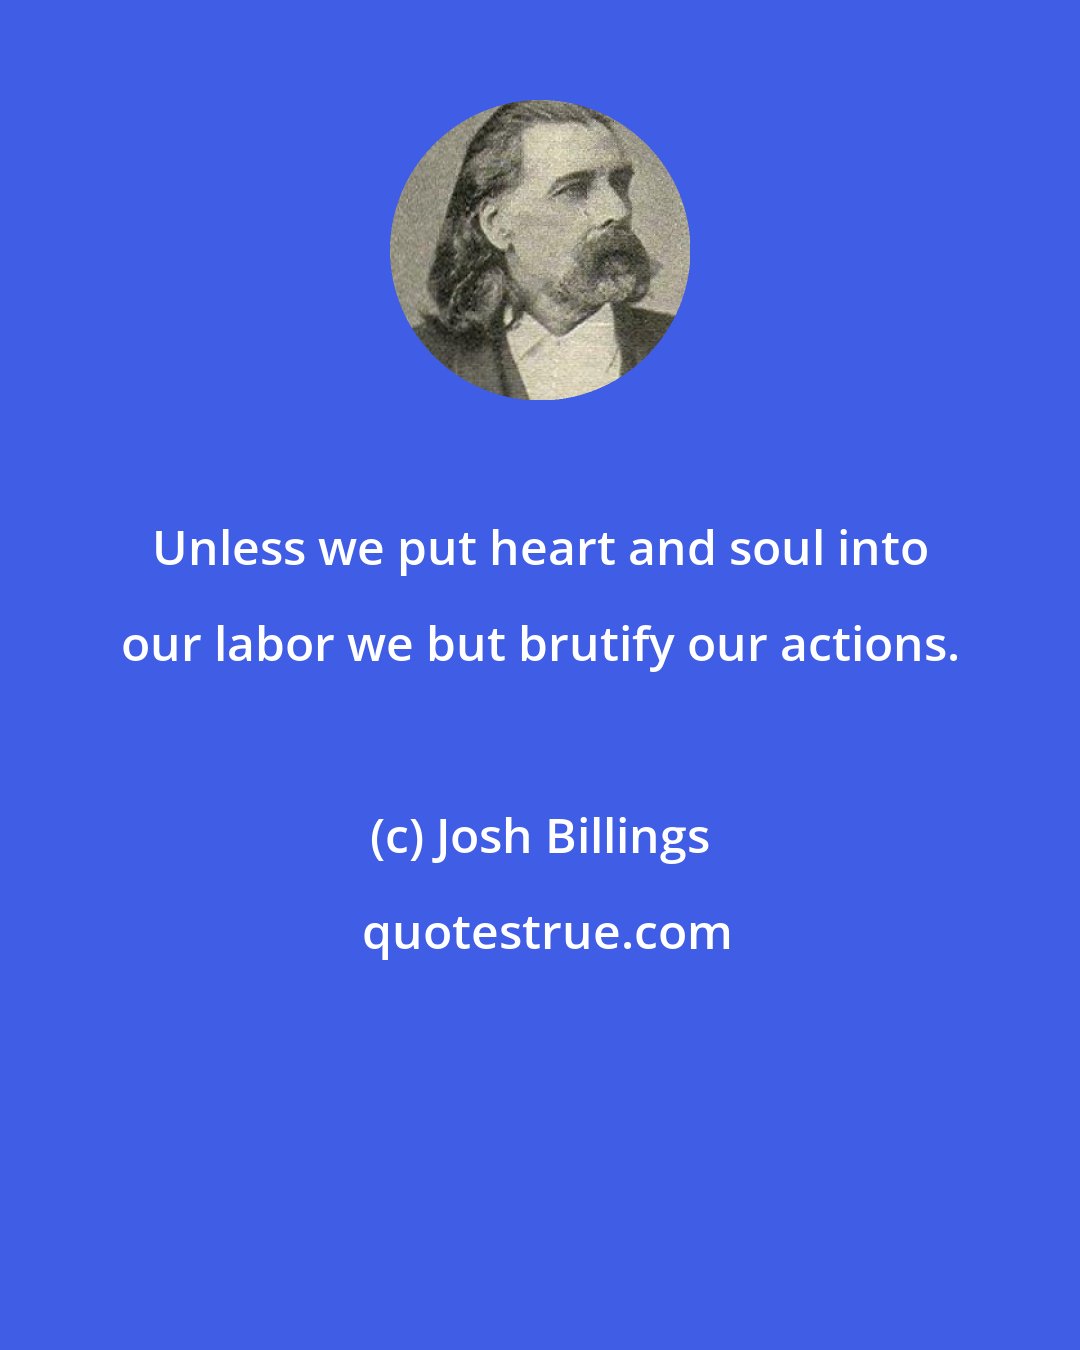 Josh Billings: Unless we put heart and soul into our labor we but brutify our actions.